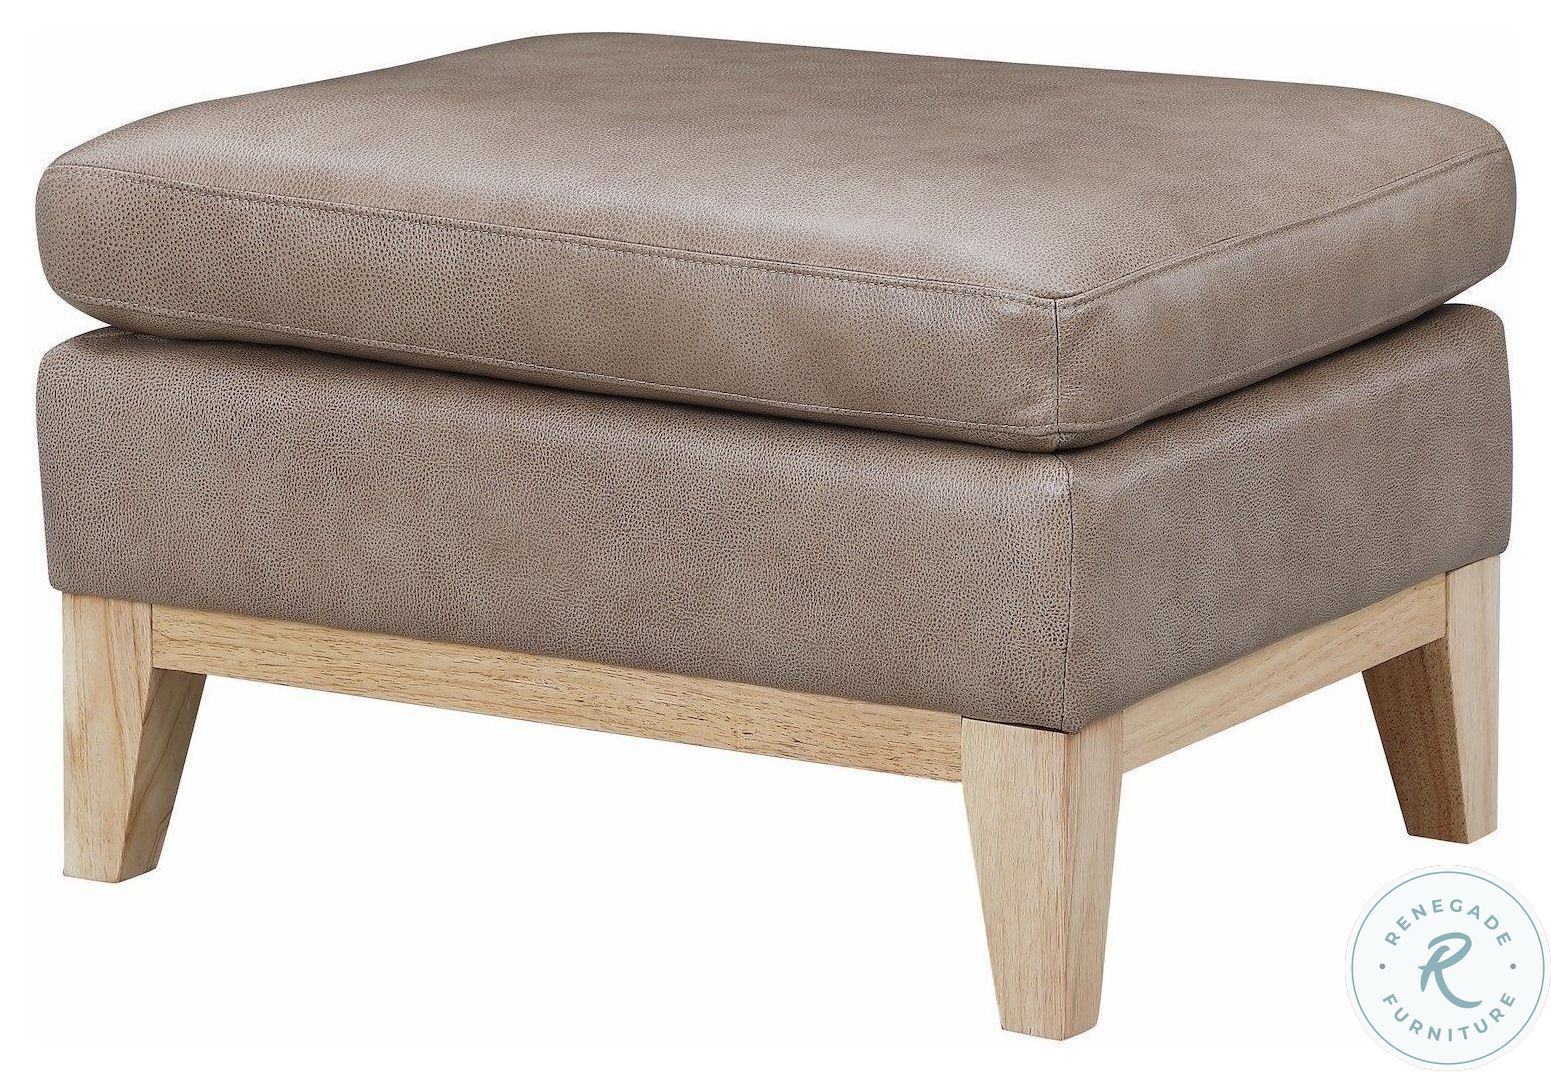 Camina Sandy Brown Leather Ottoman by Bellavita Leather